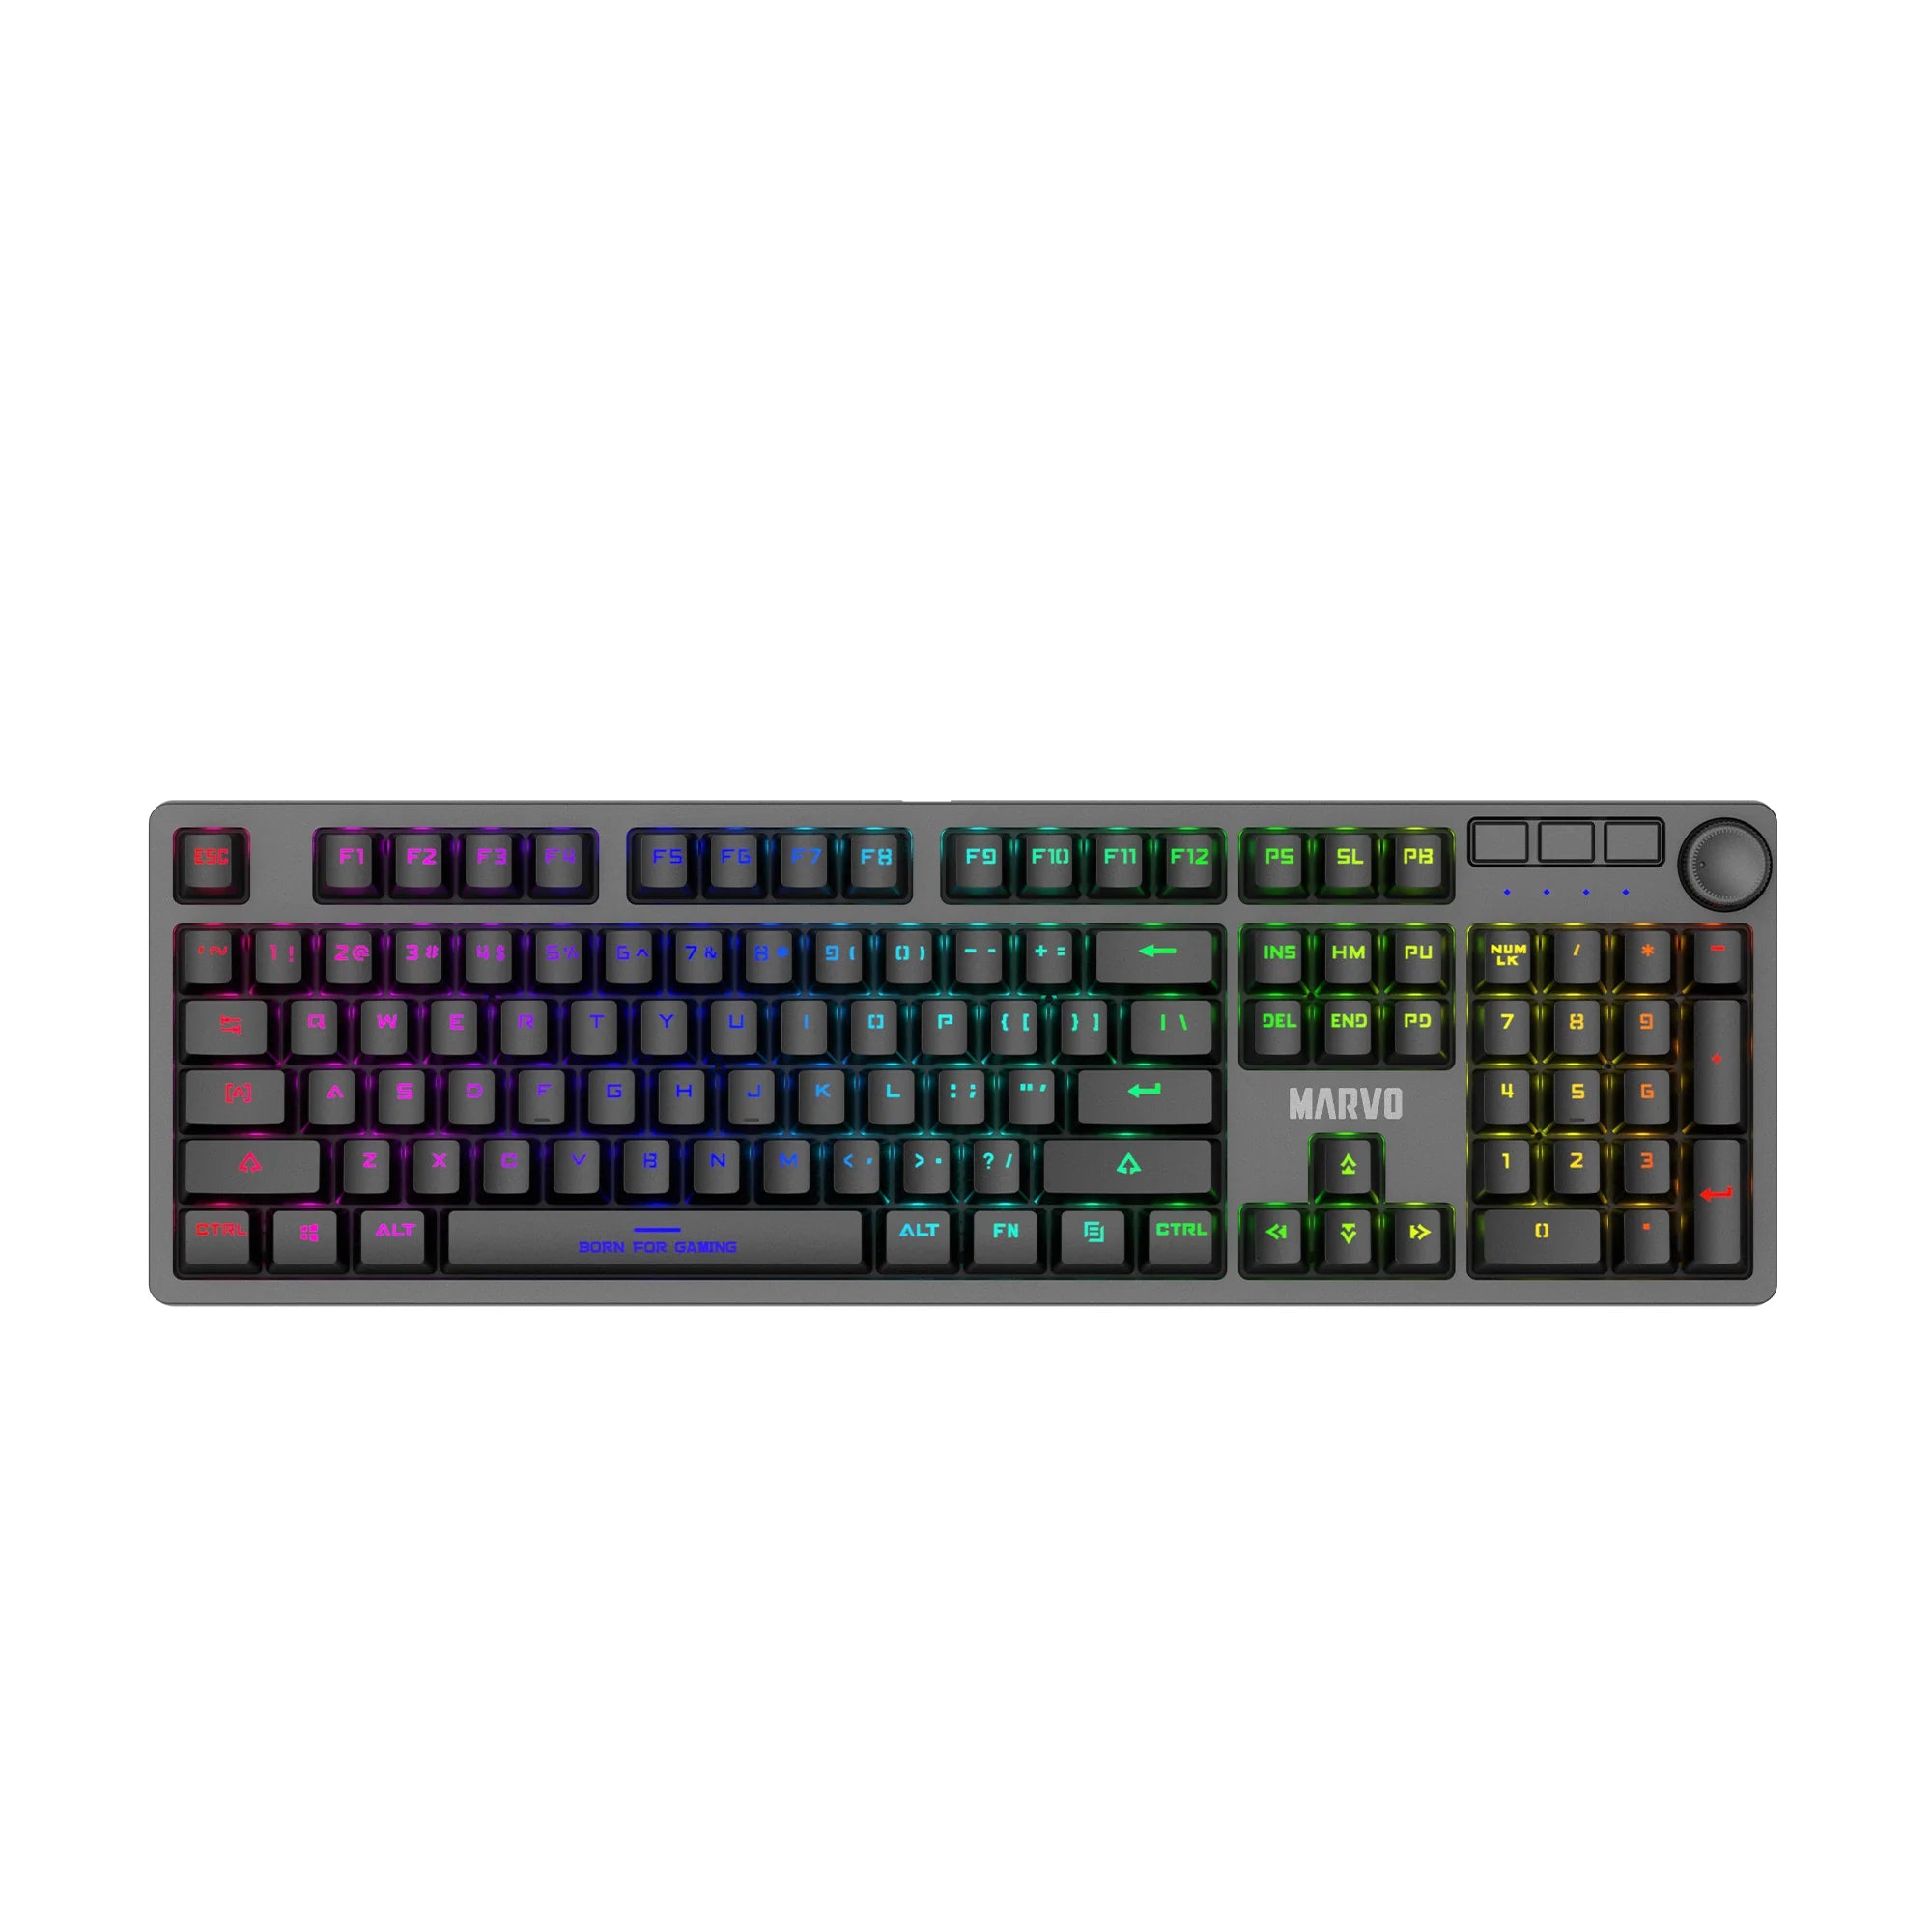 KG954 Full Size Mechanical Gaming Keyboard with Detachable USB Type-C Cable